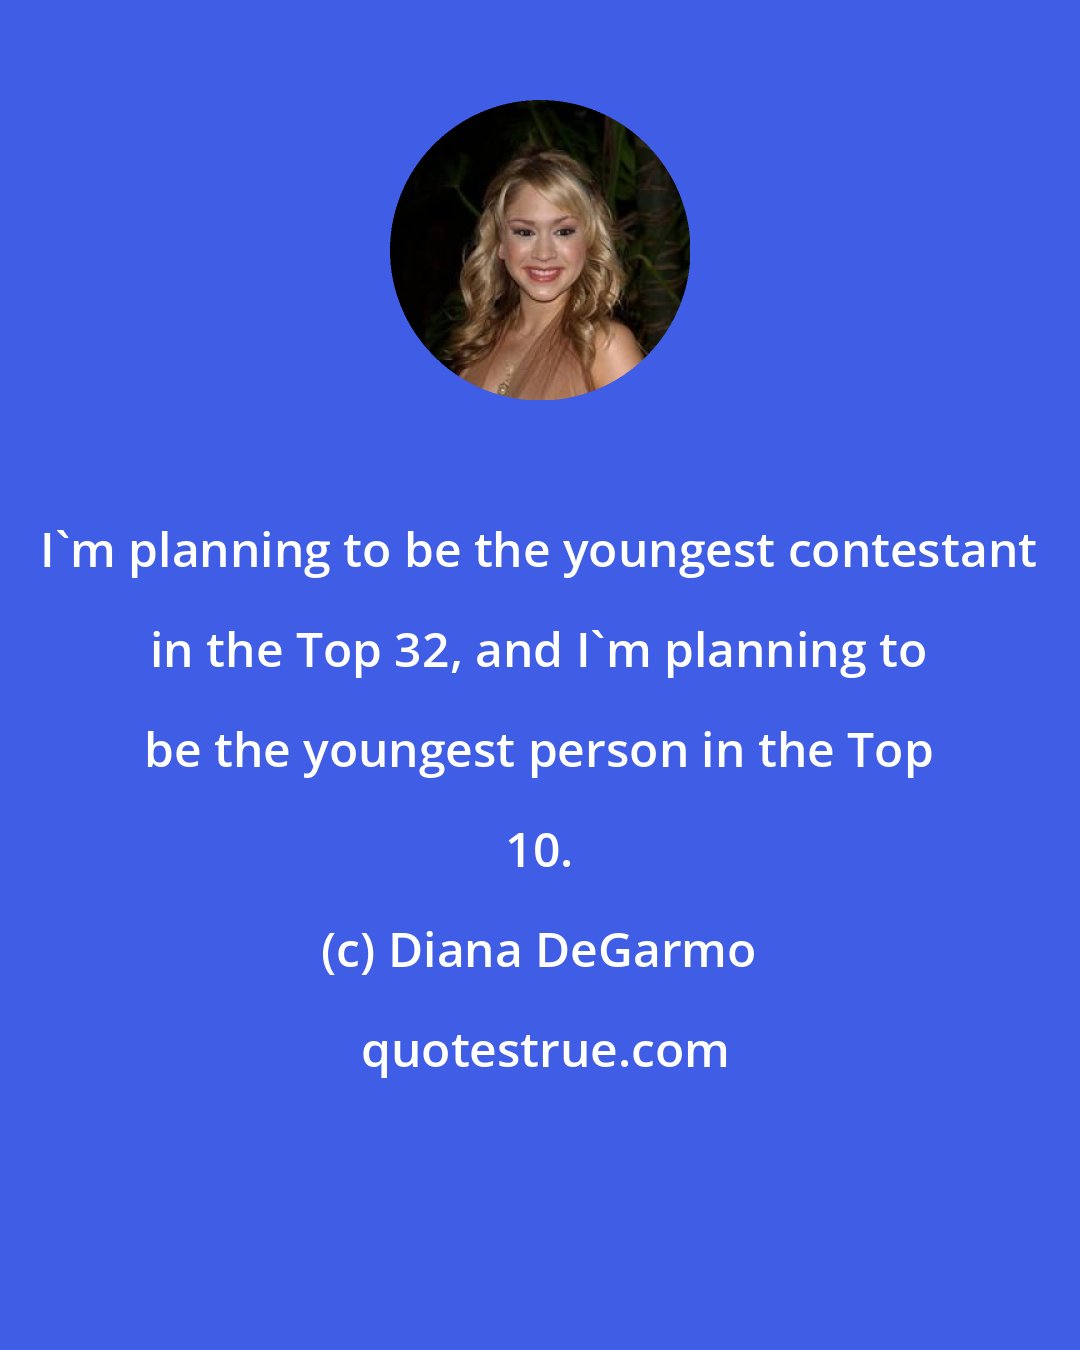 Diana DeGarmo: I'm planning to be the youngest contestant in the Top 32, and I'm planning to be the youngest person in the Top 10.